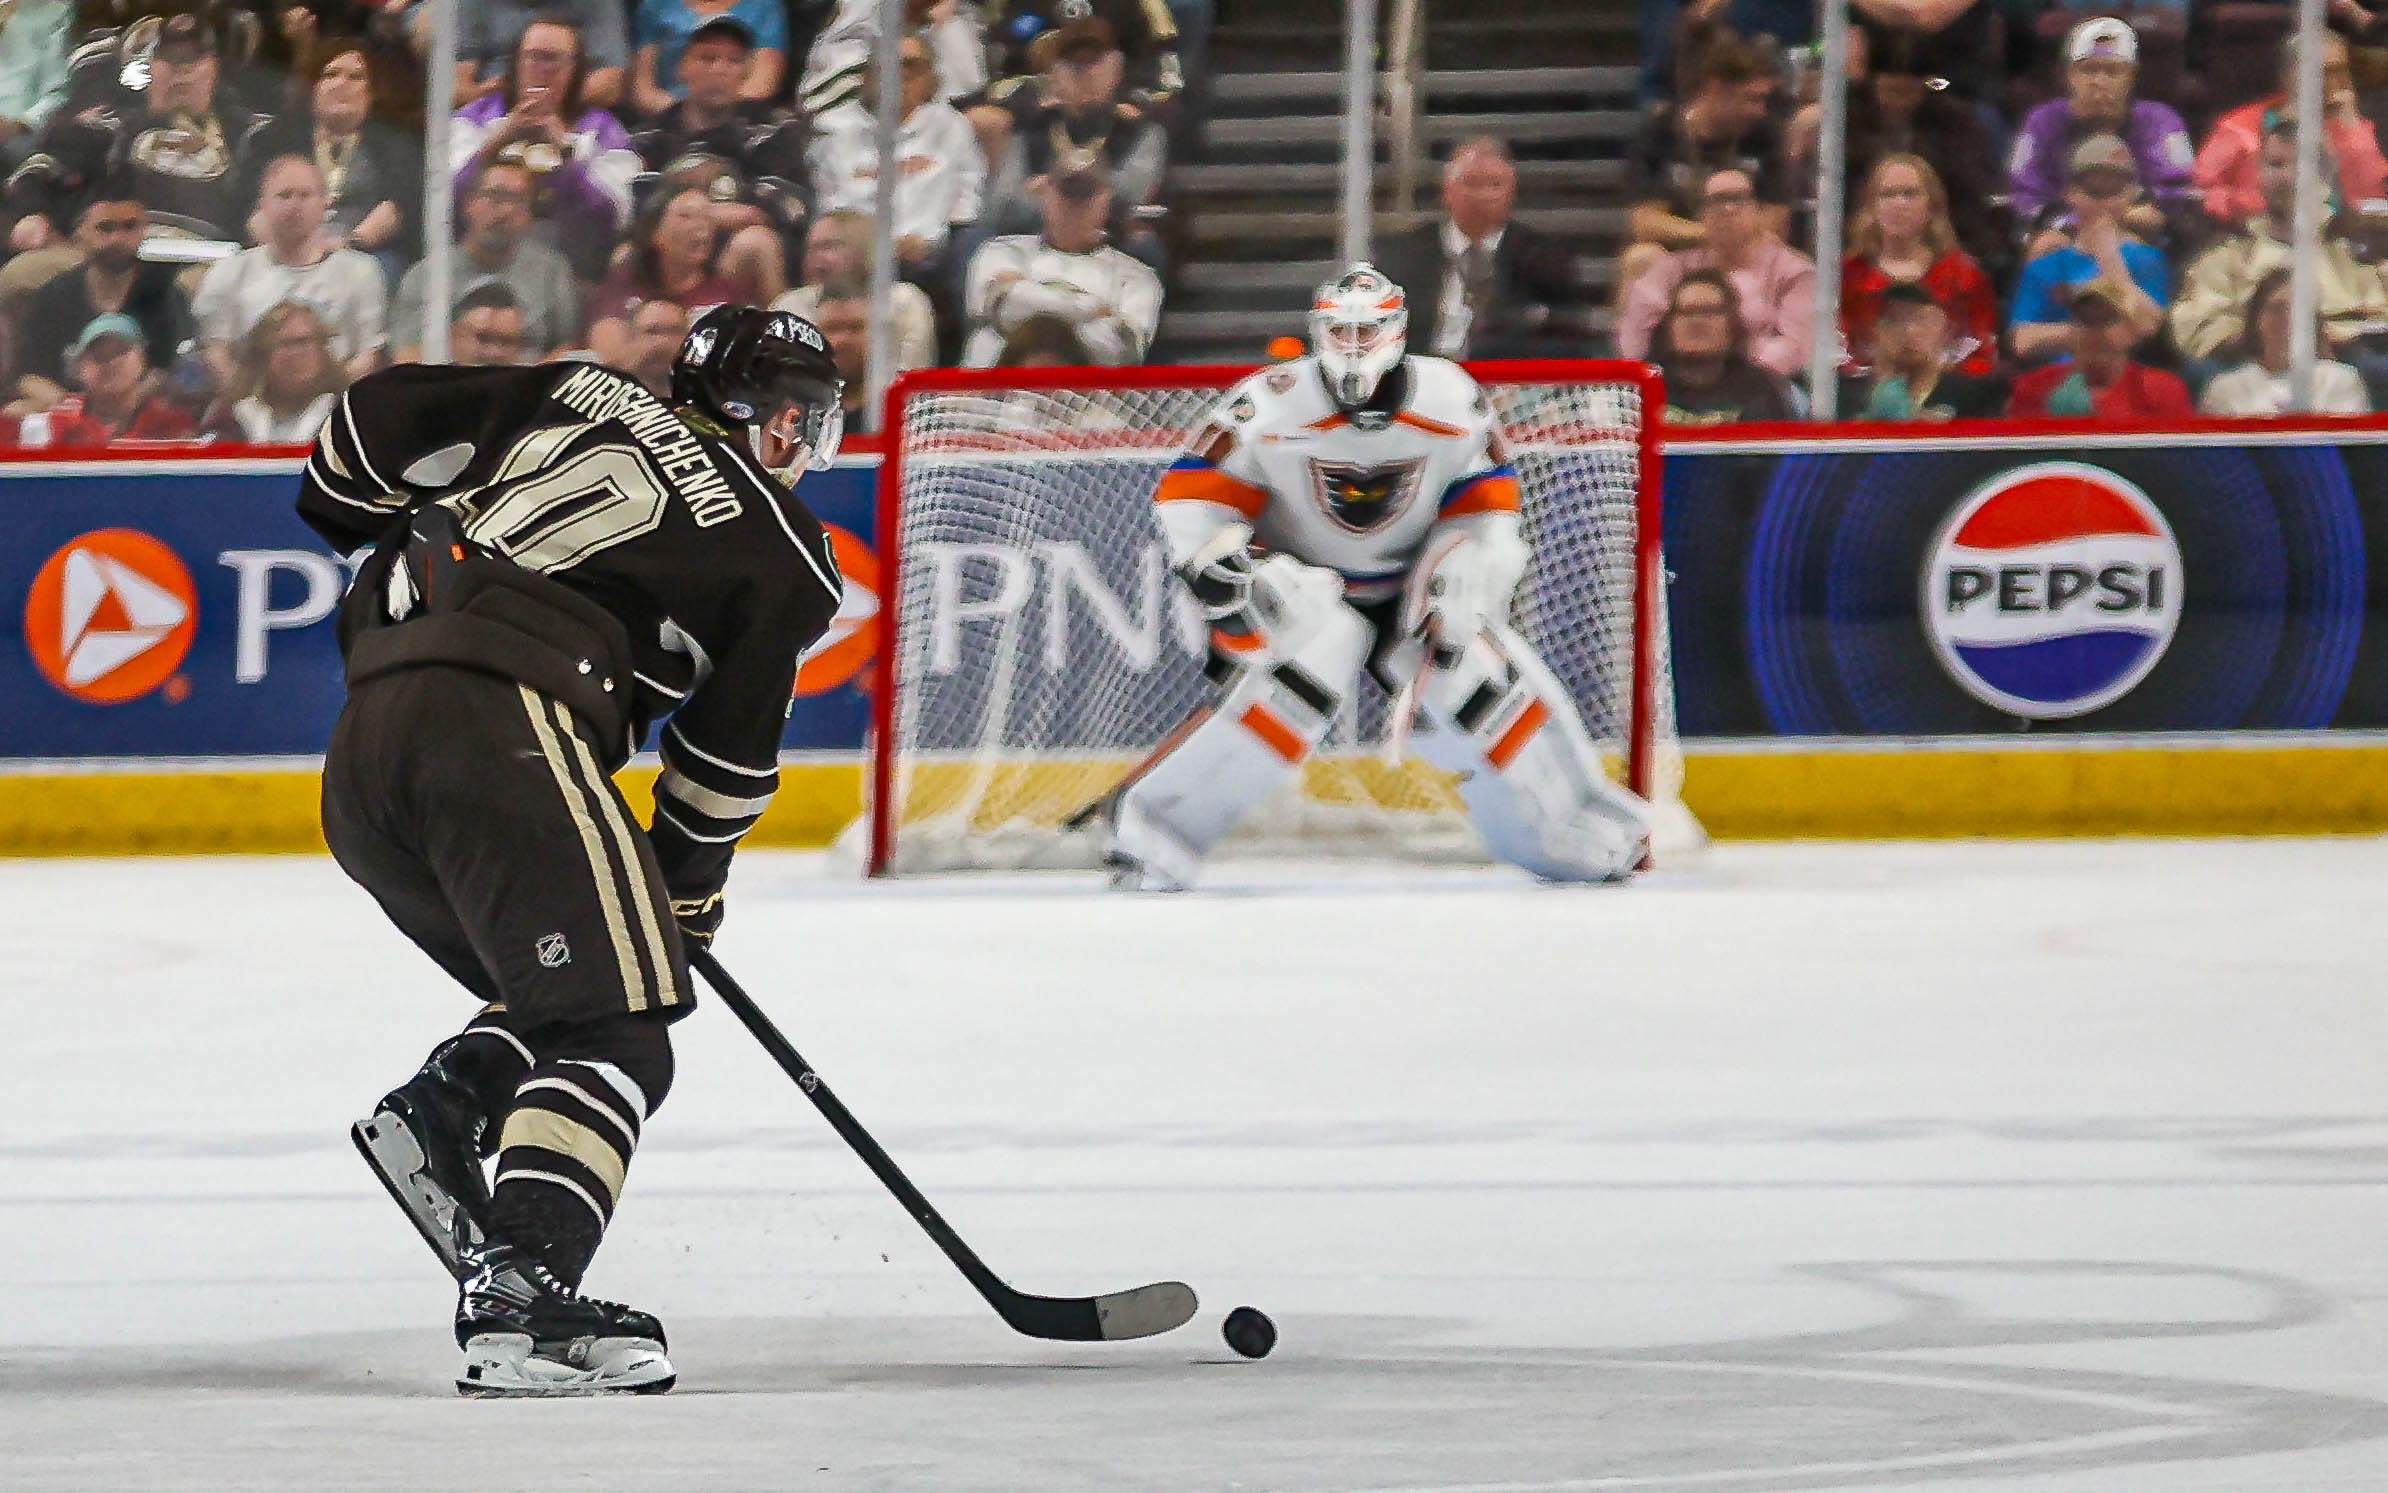 One series down: Hershey Bears close out Lehigh Valley to continue march to Calder Cup